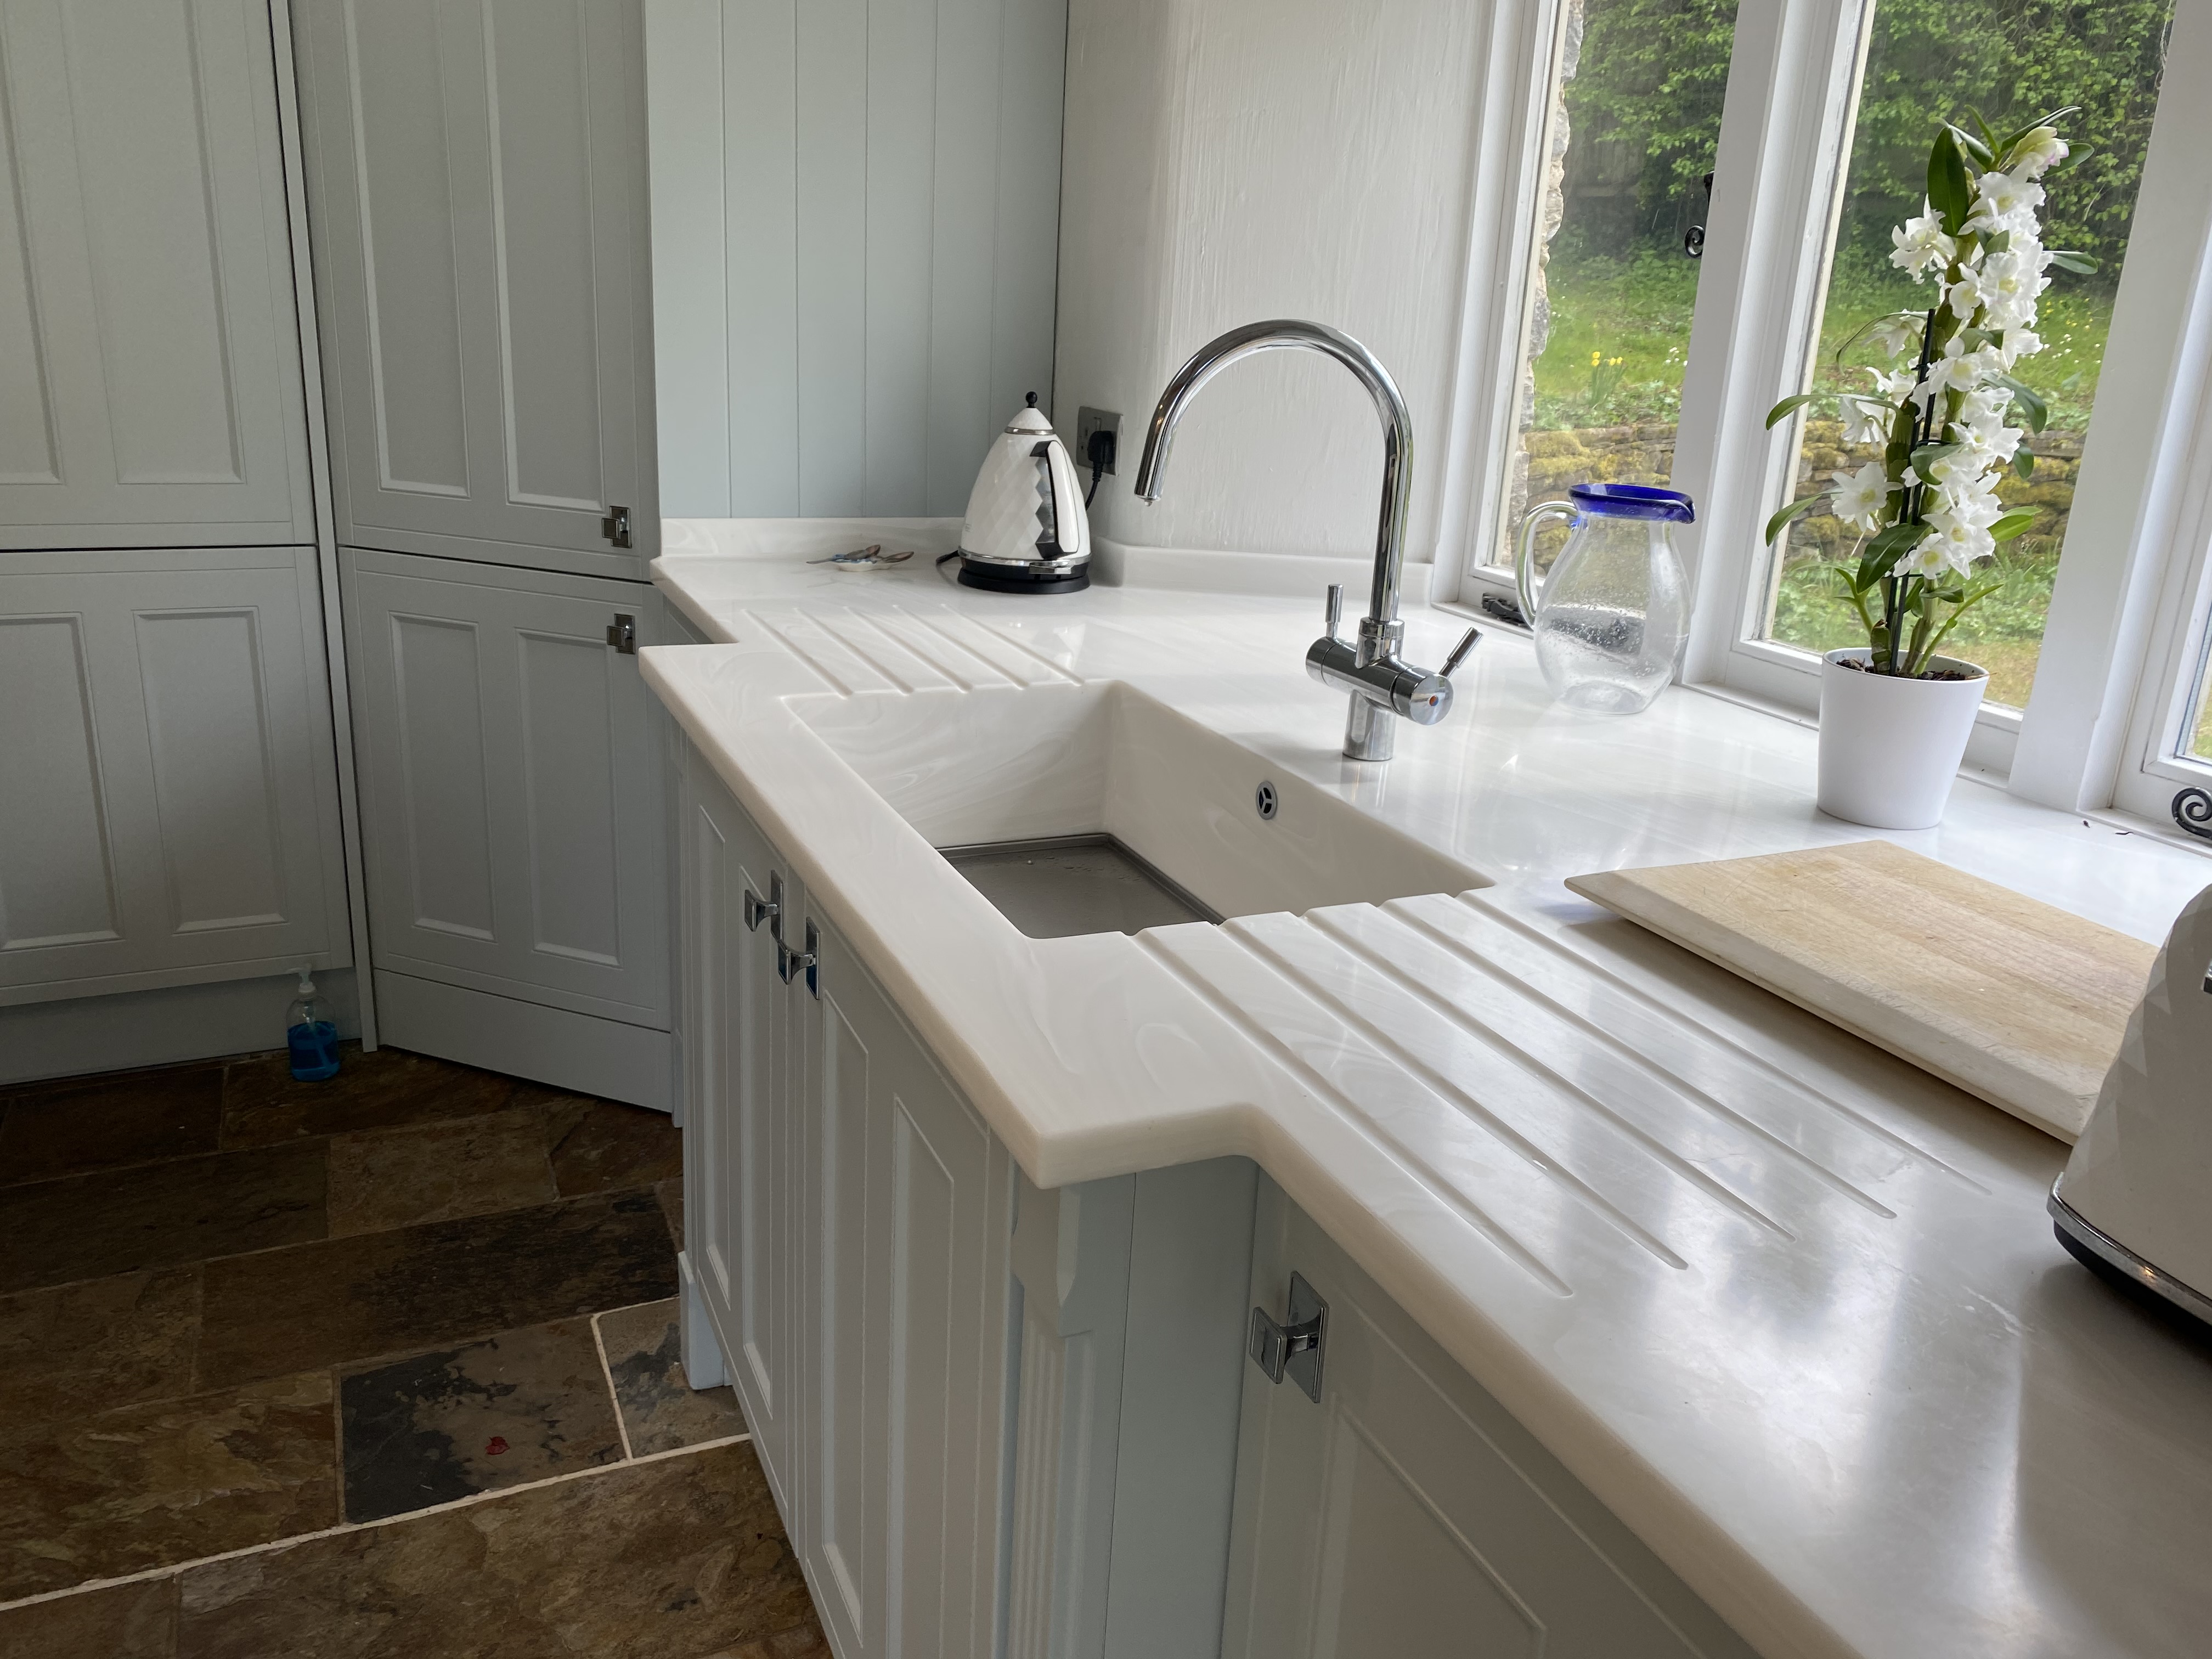 solid surface corian built in drainer grooves sink bespoke